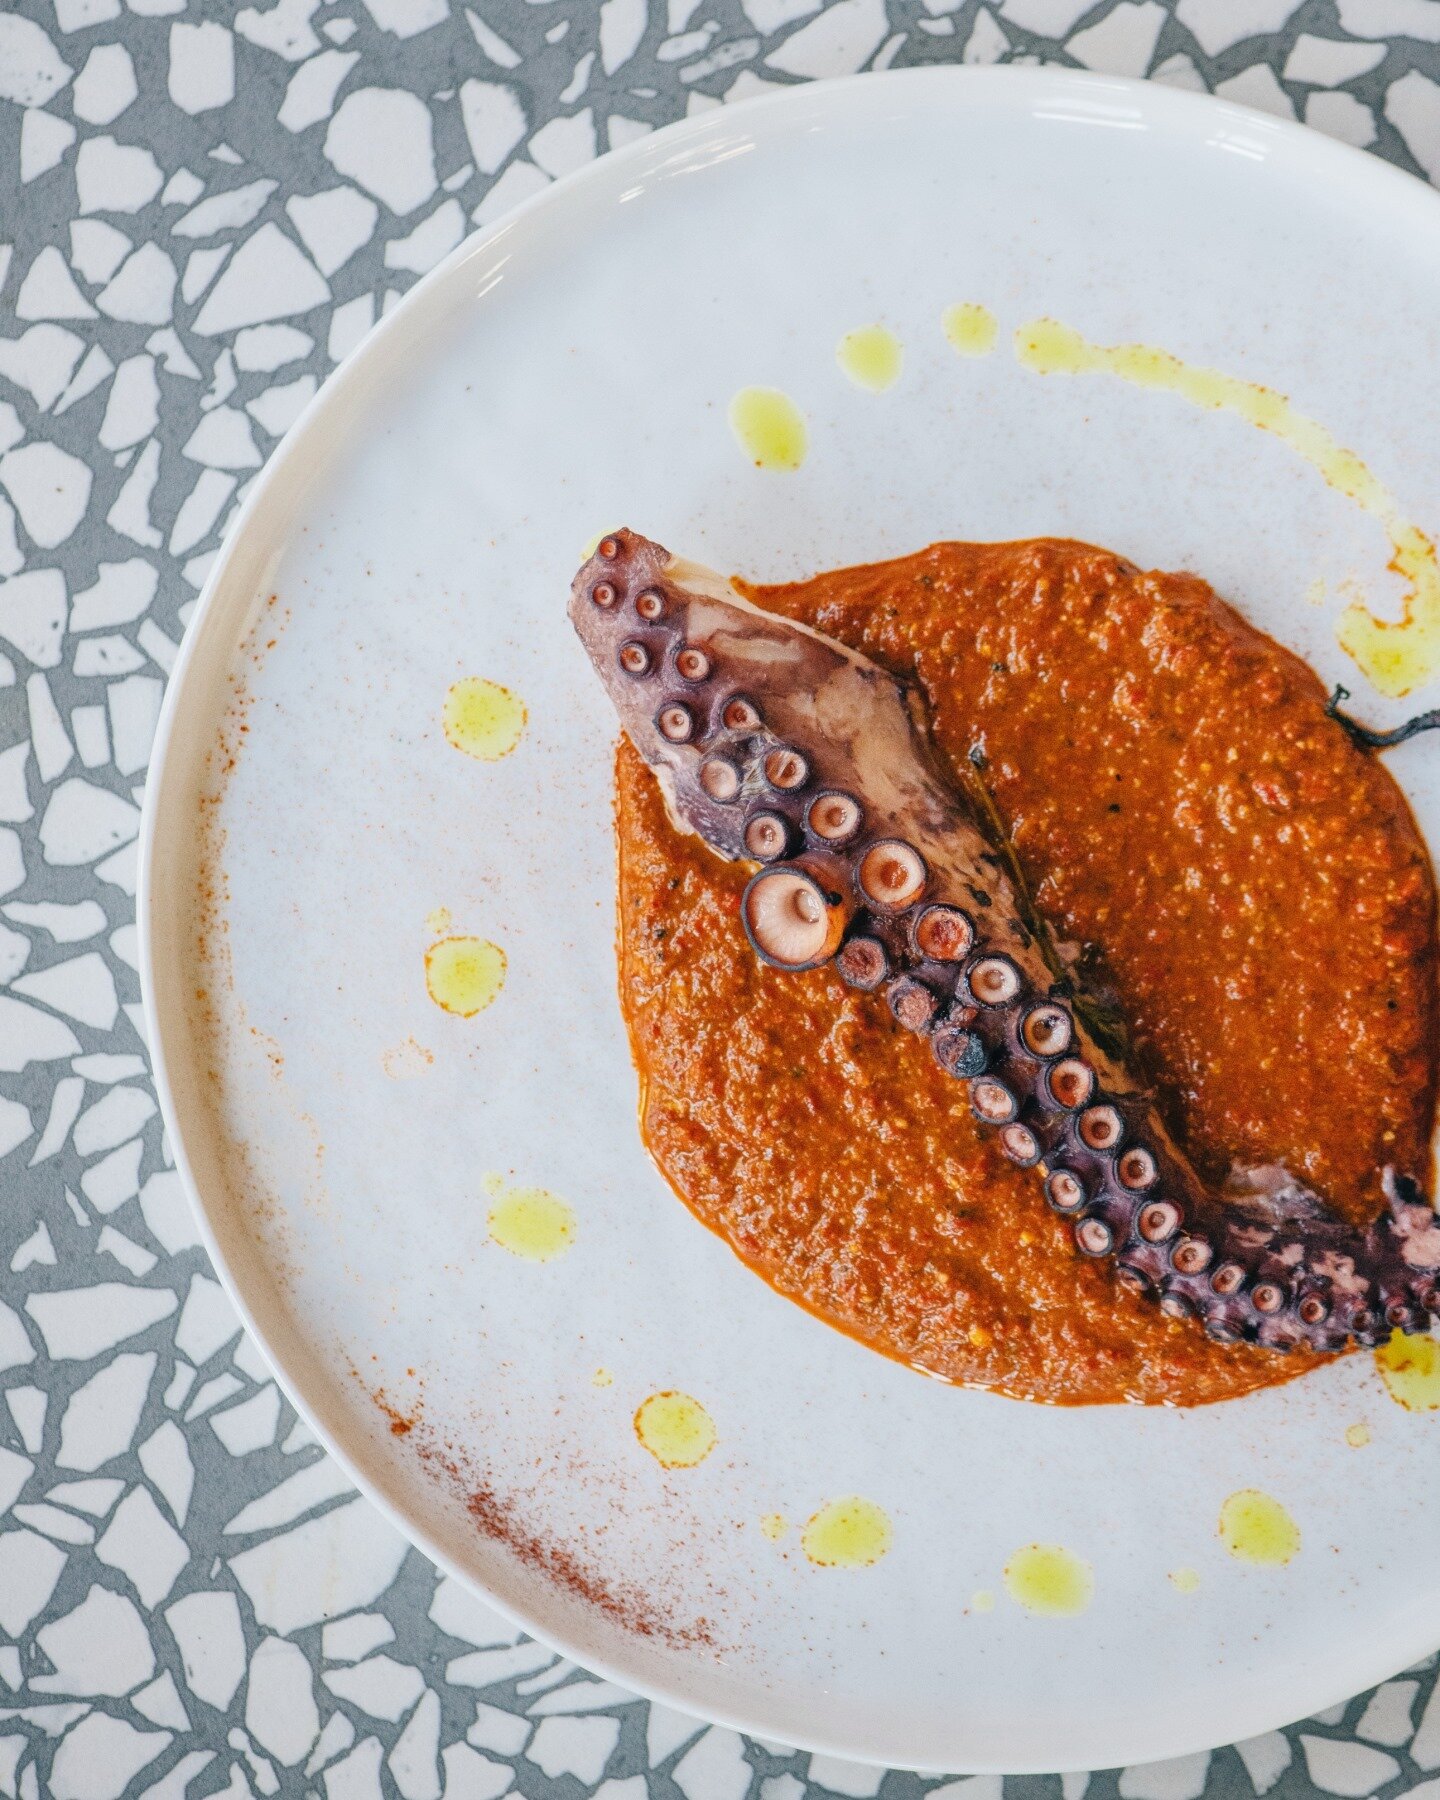 🐙&middot; Laurel Pulpo Romesco

Grilled Octopus with Pecan Romesco featured in our Tapas selection #laurelonrutledge